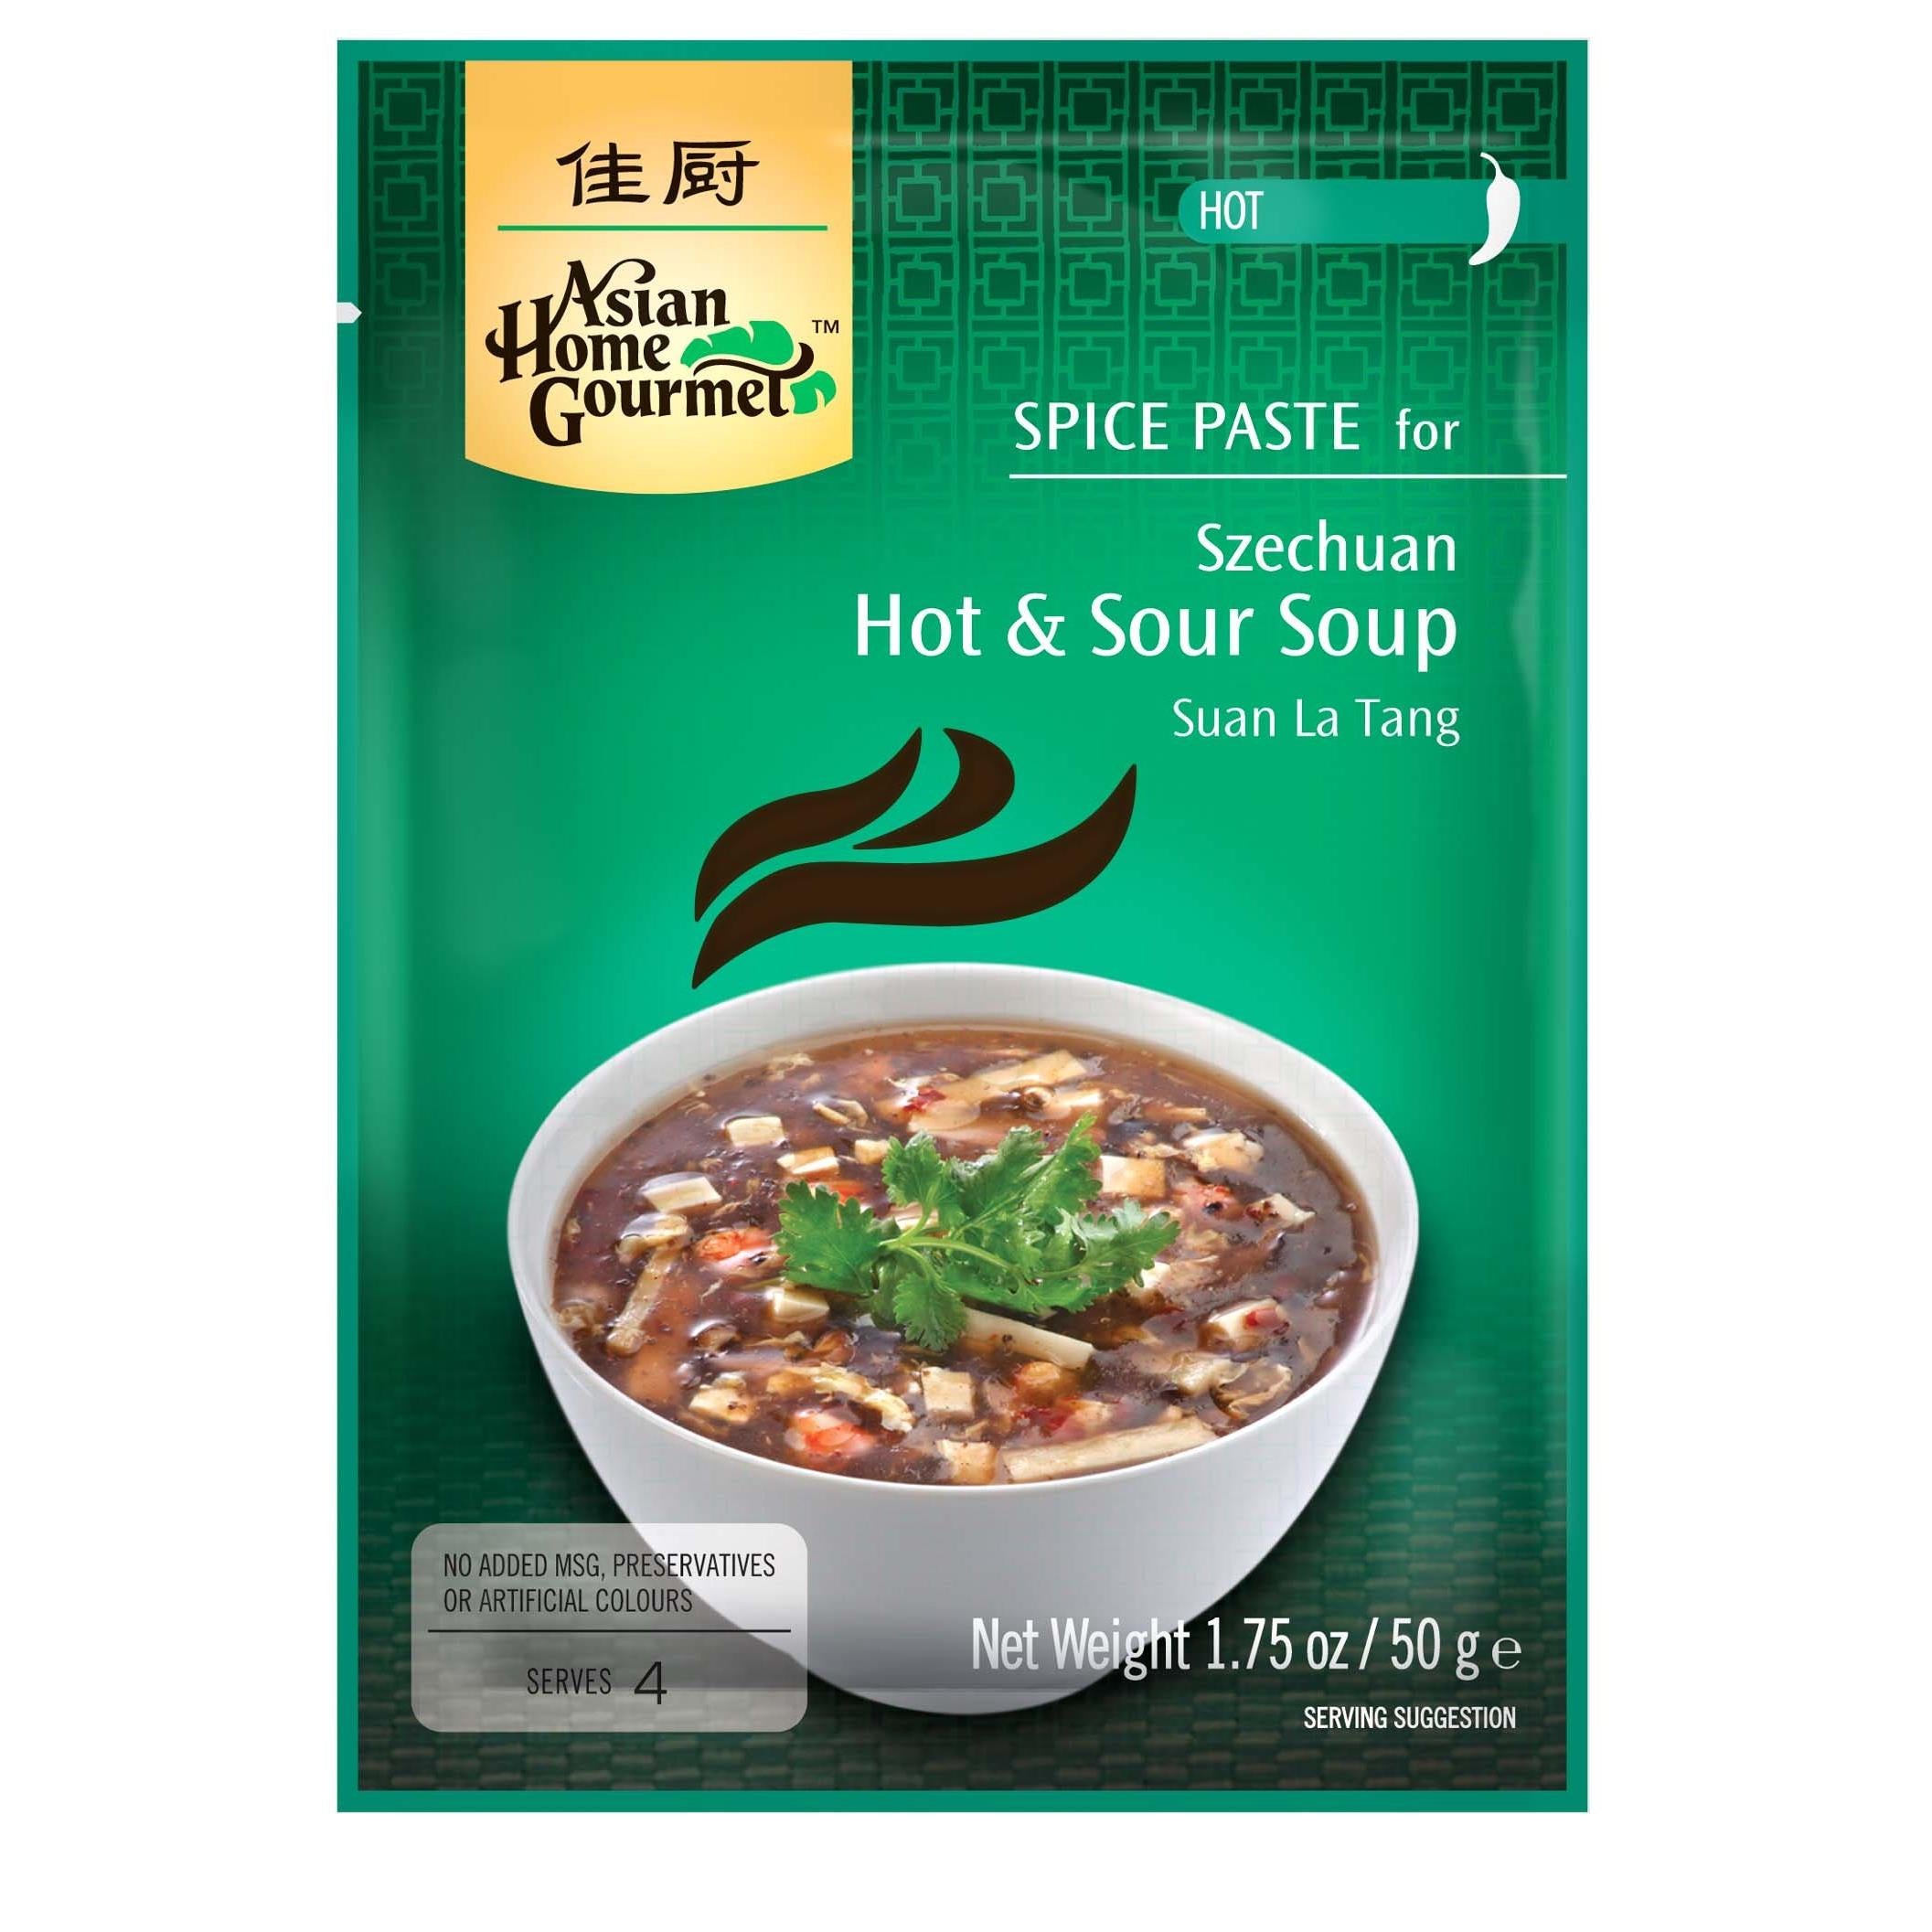 ASIAN HOME GOURMET Spice Paste for Szechuan Hot and Sour Soup (Instant Suan La Tang Sauce Mix) (Pack of 3)